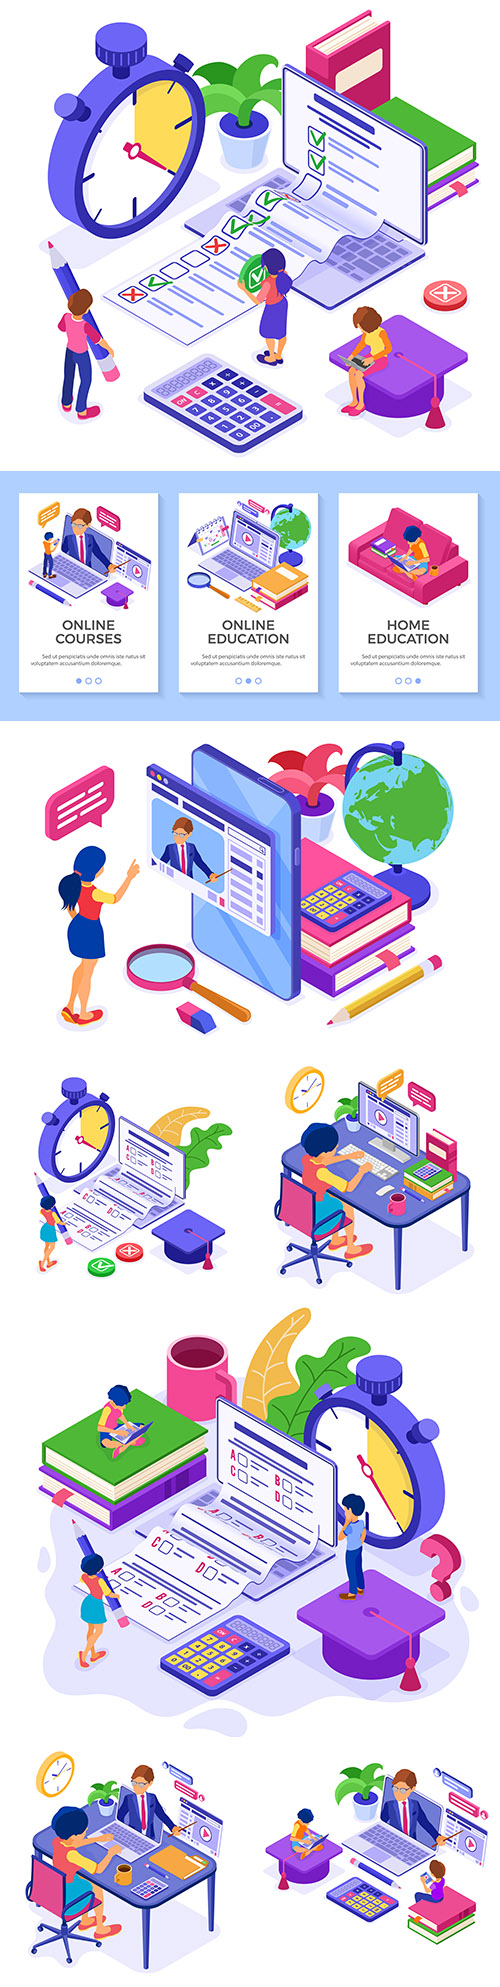 Online distance learning from home isometric illustrations
